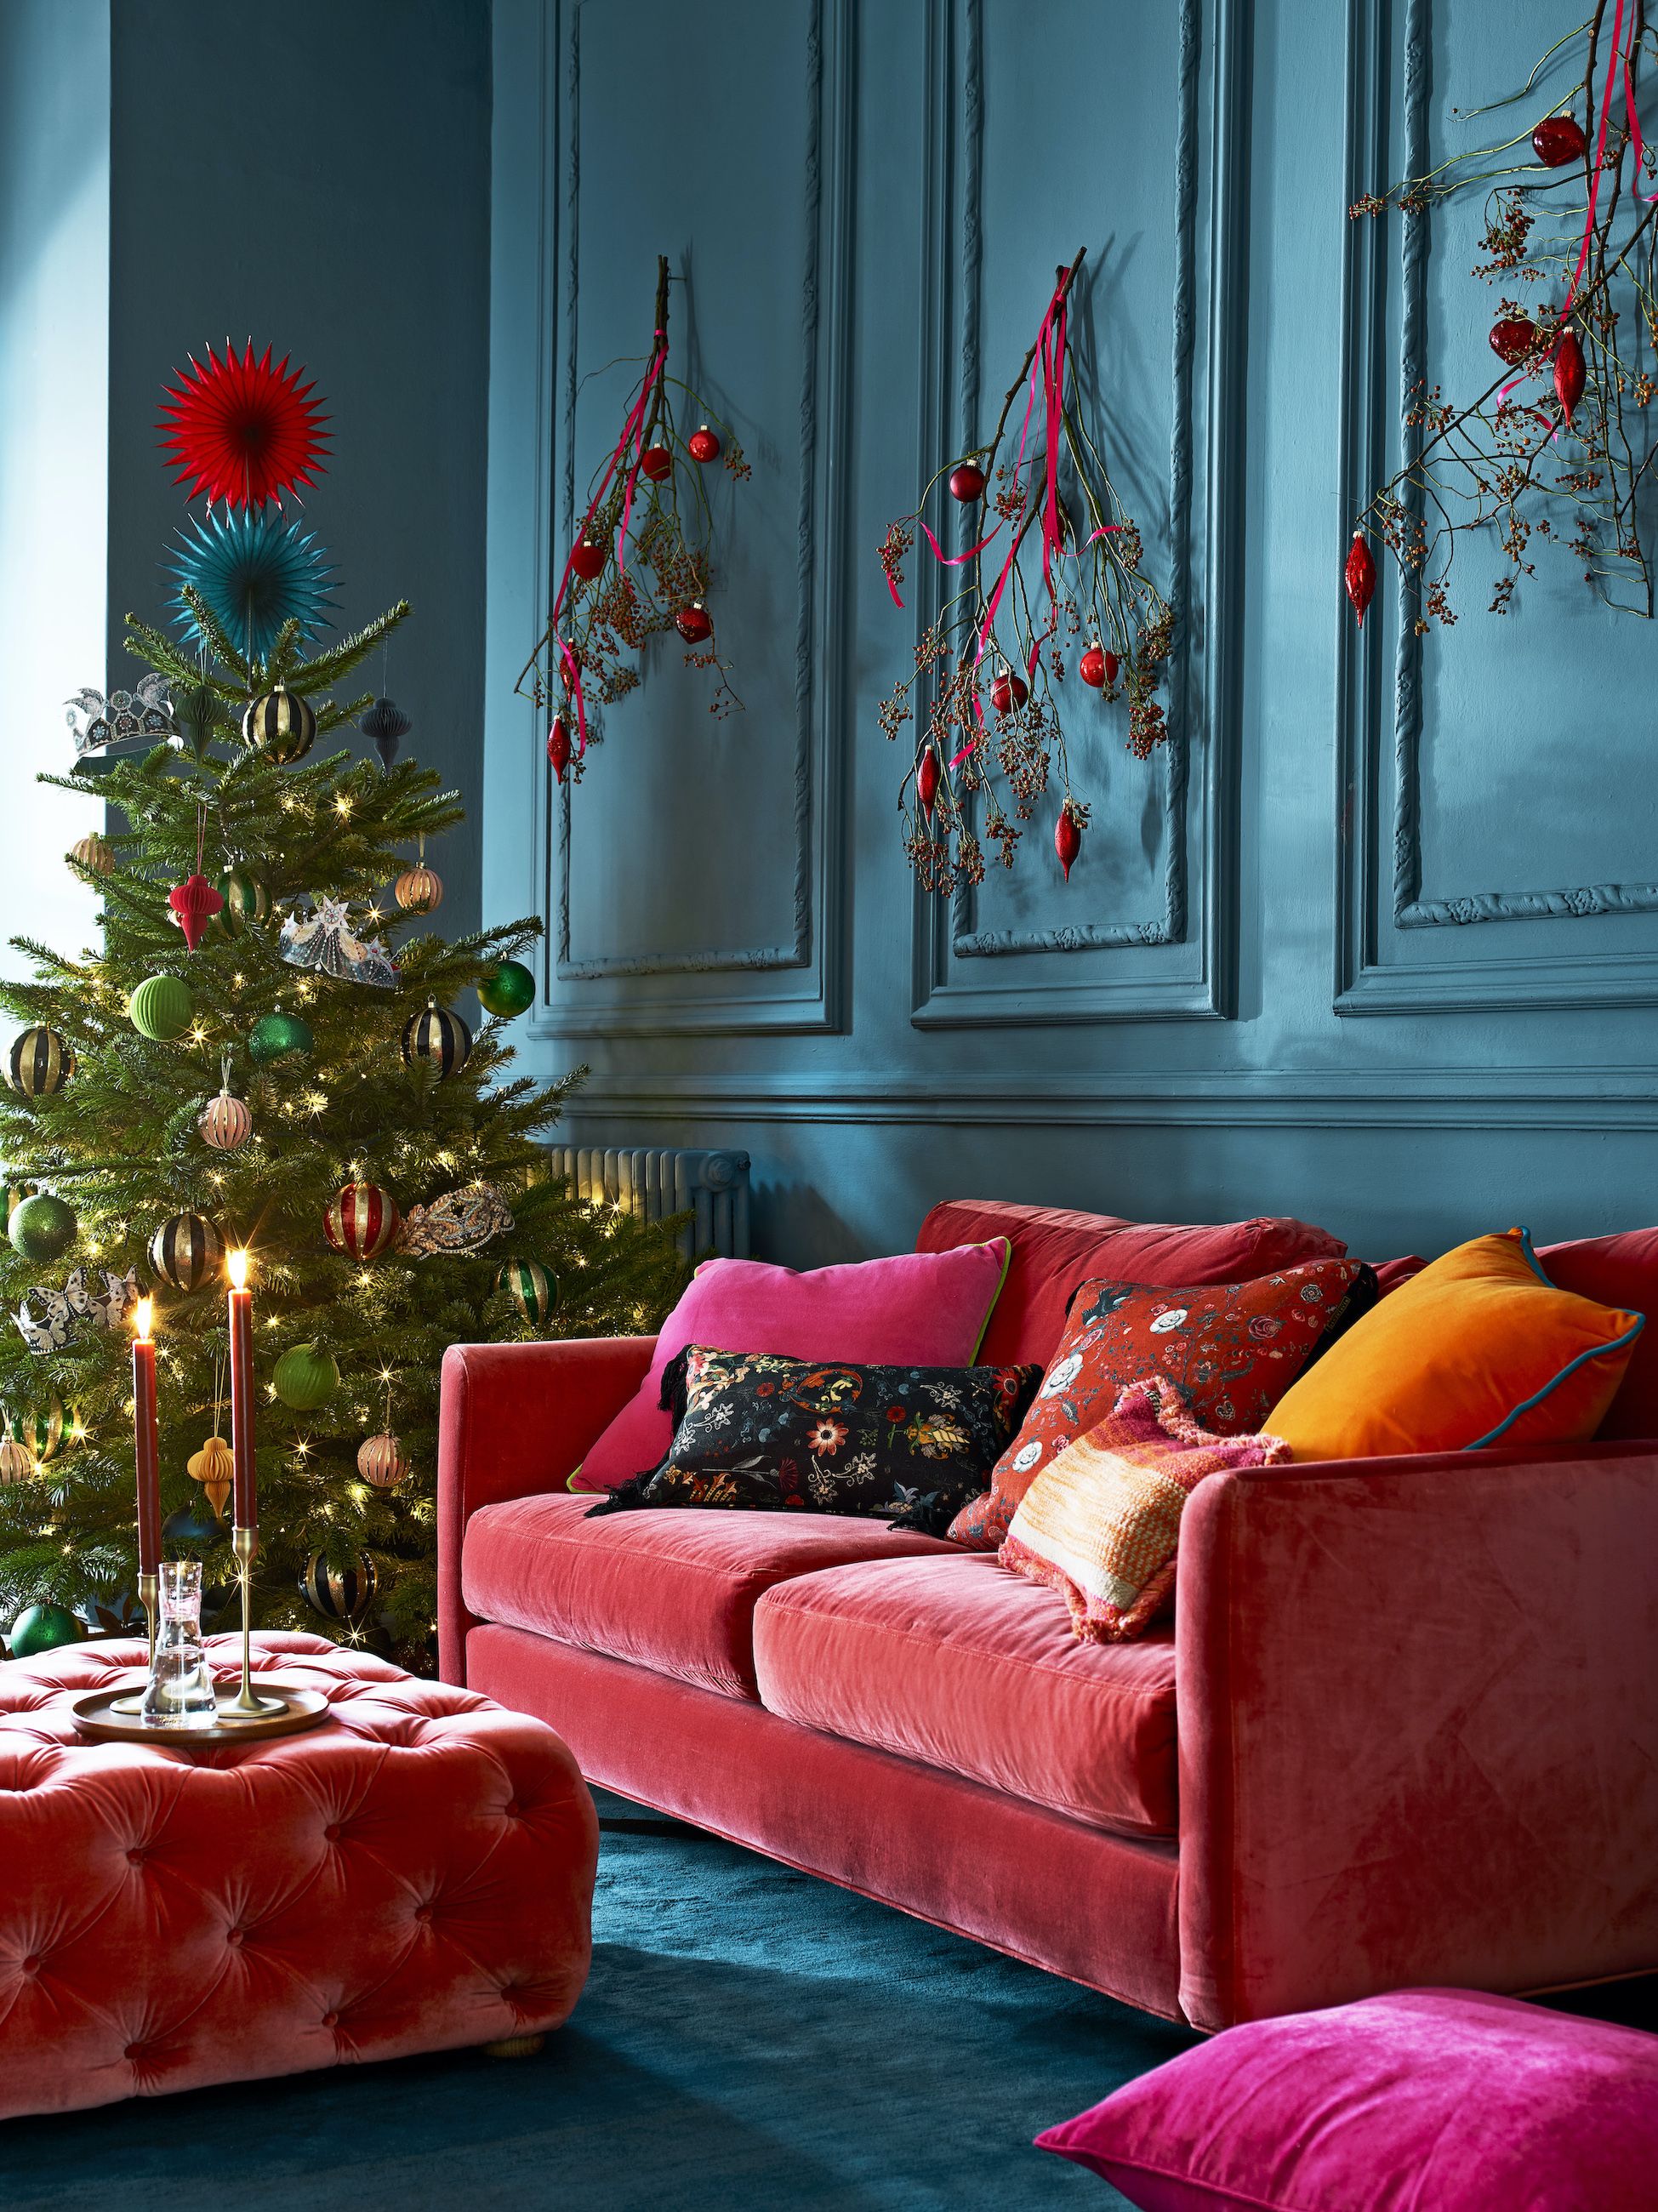 Christmas Living Room: 10 Ways To Decorate At Christmas